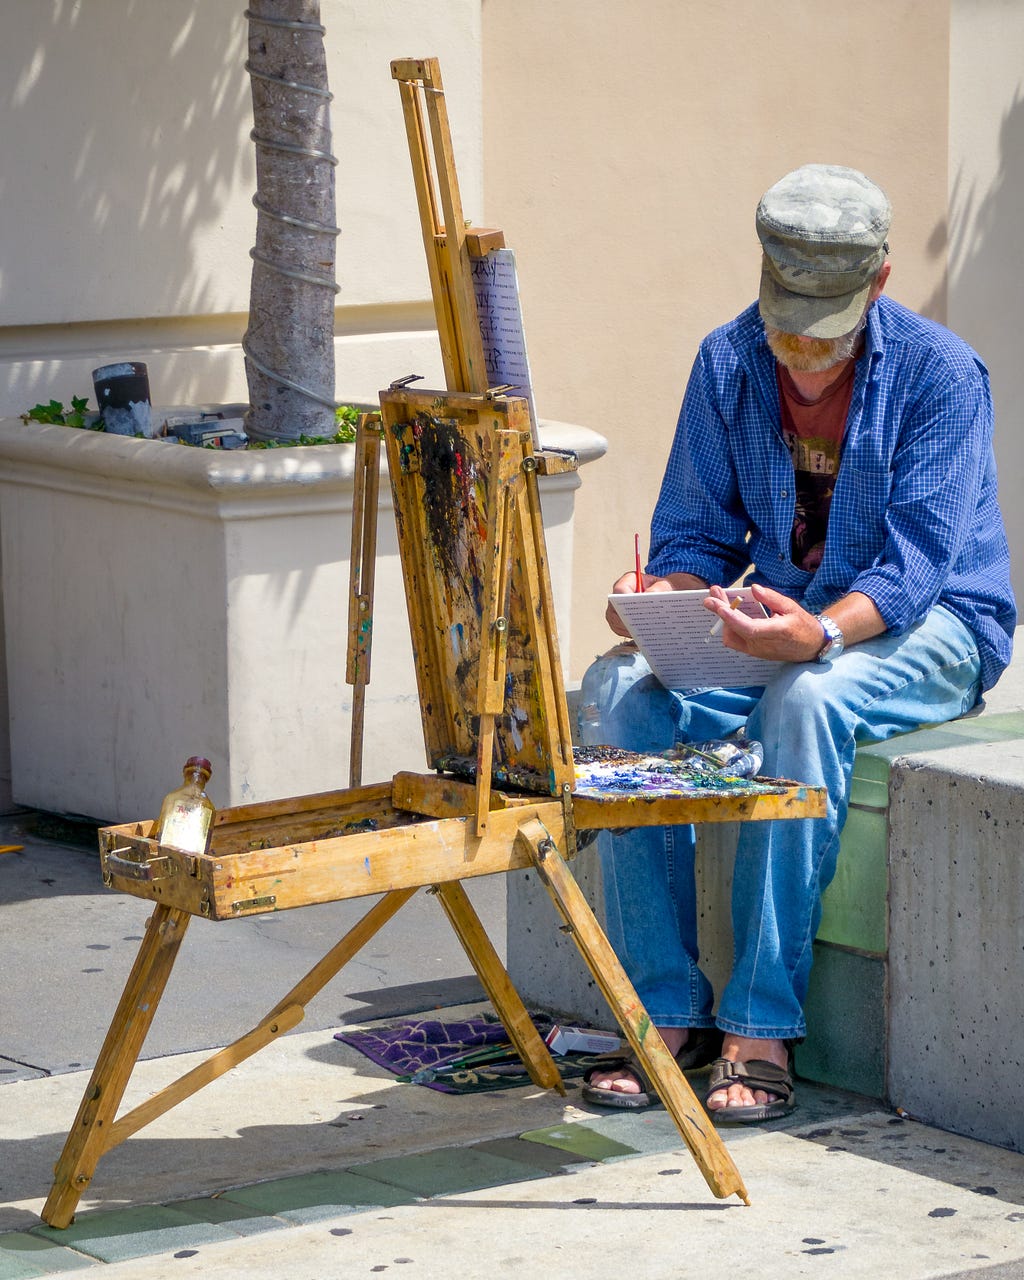 A painter is seated at a portable easel in a city courtyard.